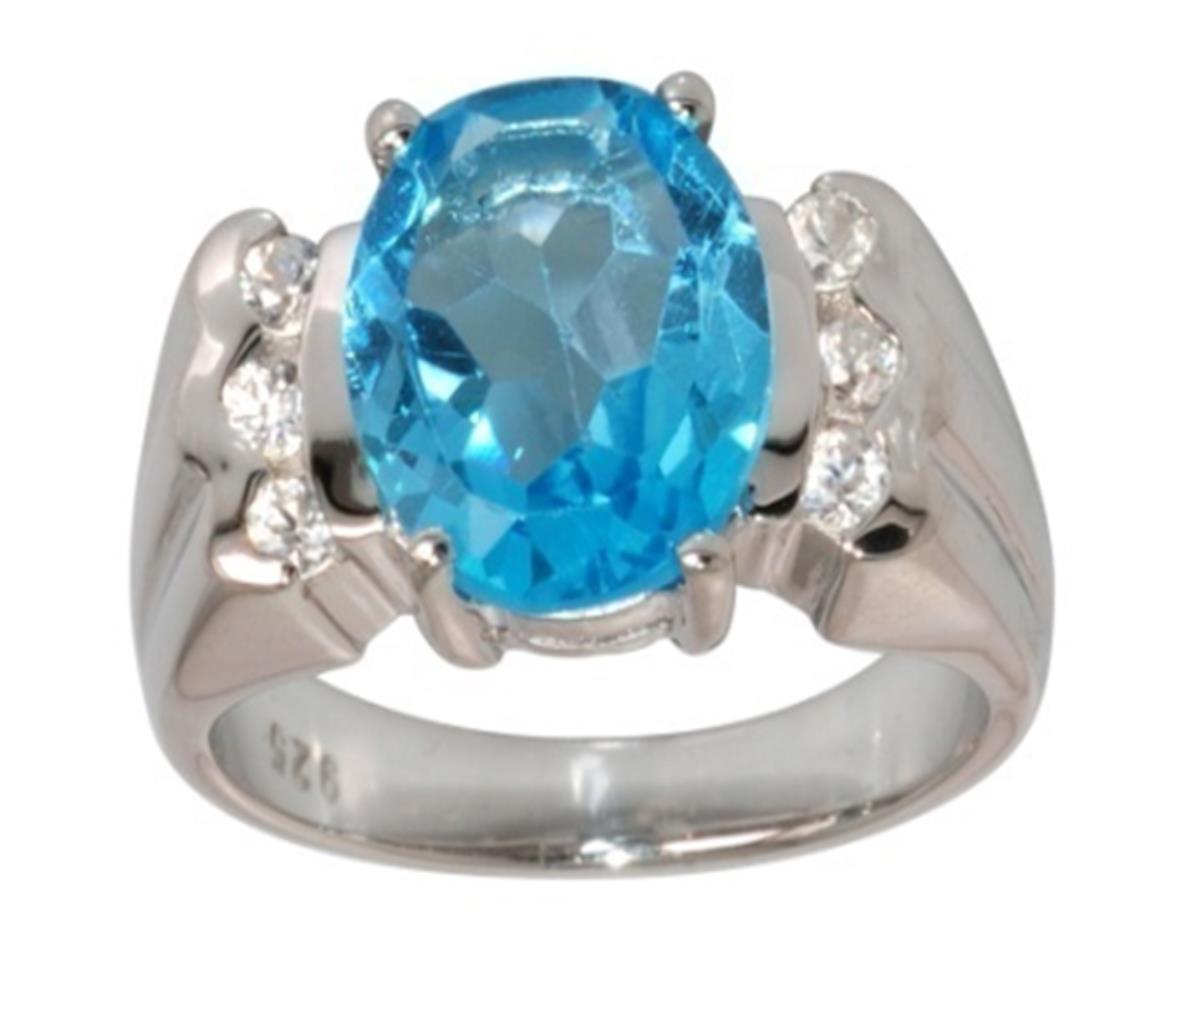 10K White Gold 11x9mm Oval Cut Sky Blue Topaz with Triple Rd White Zircon Sides Fashion Ring